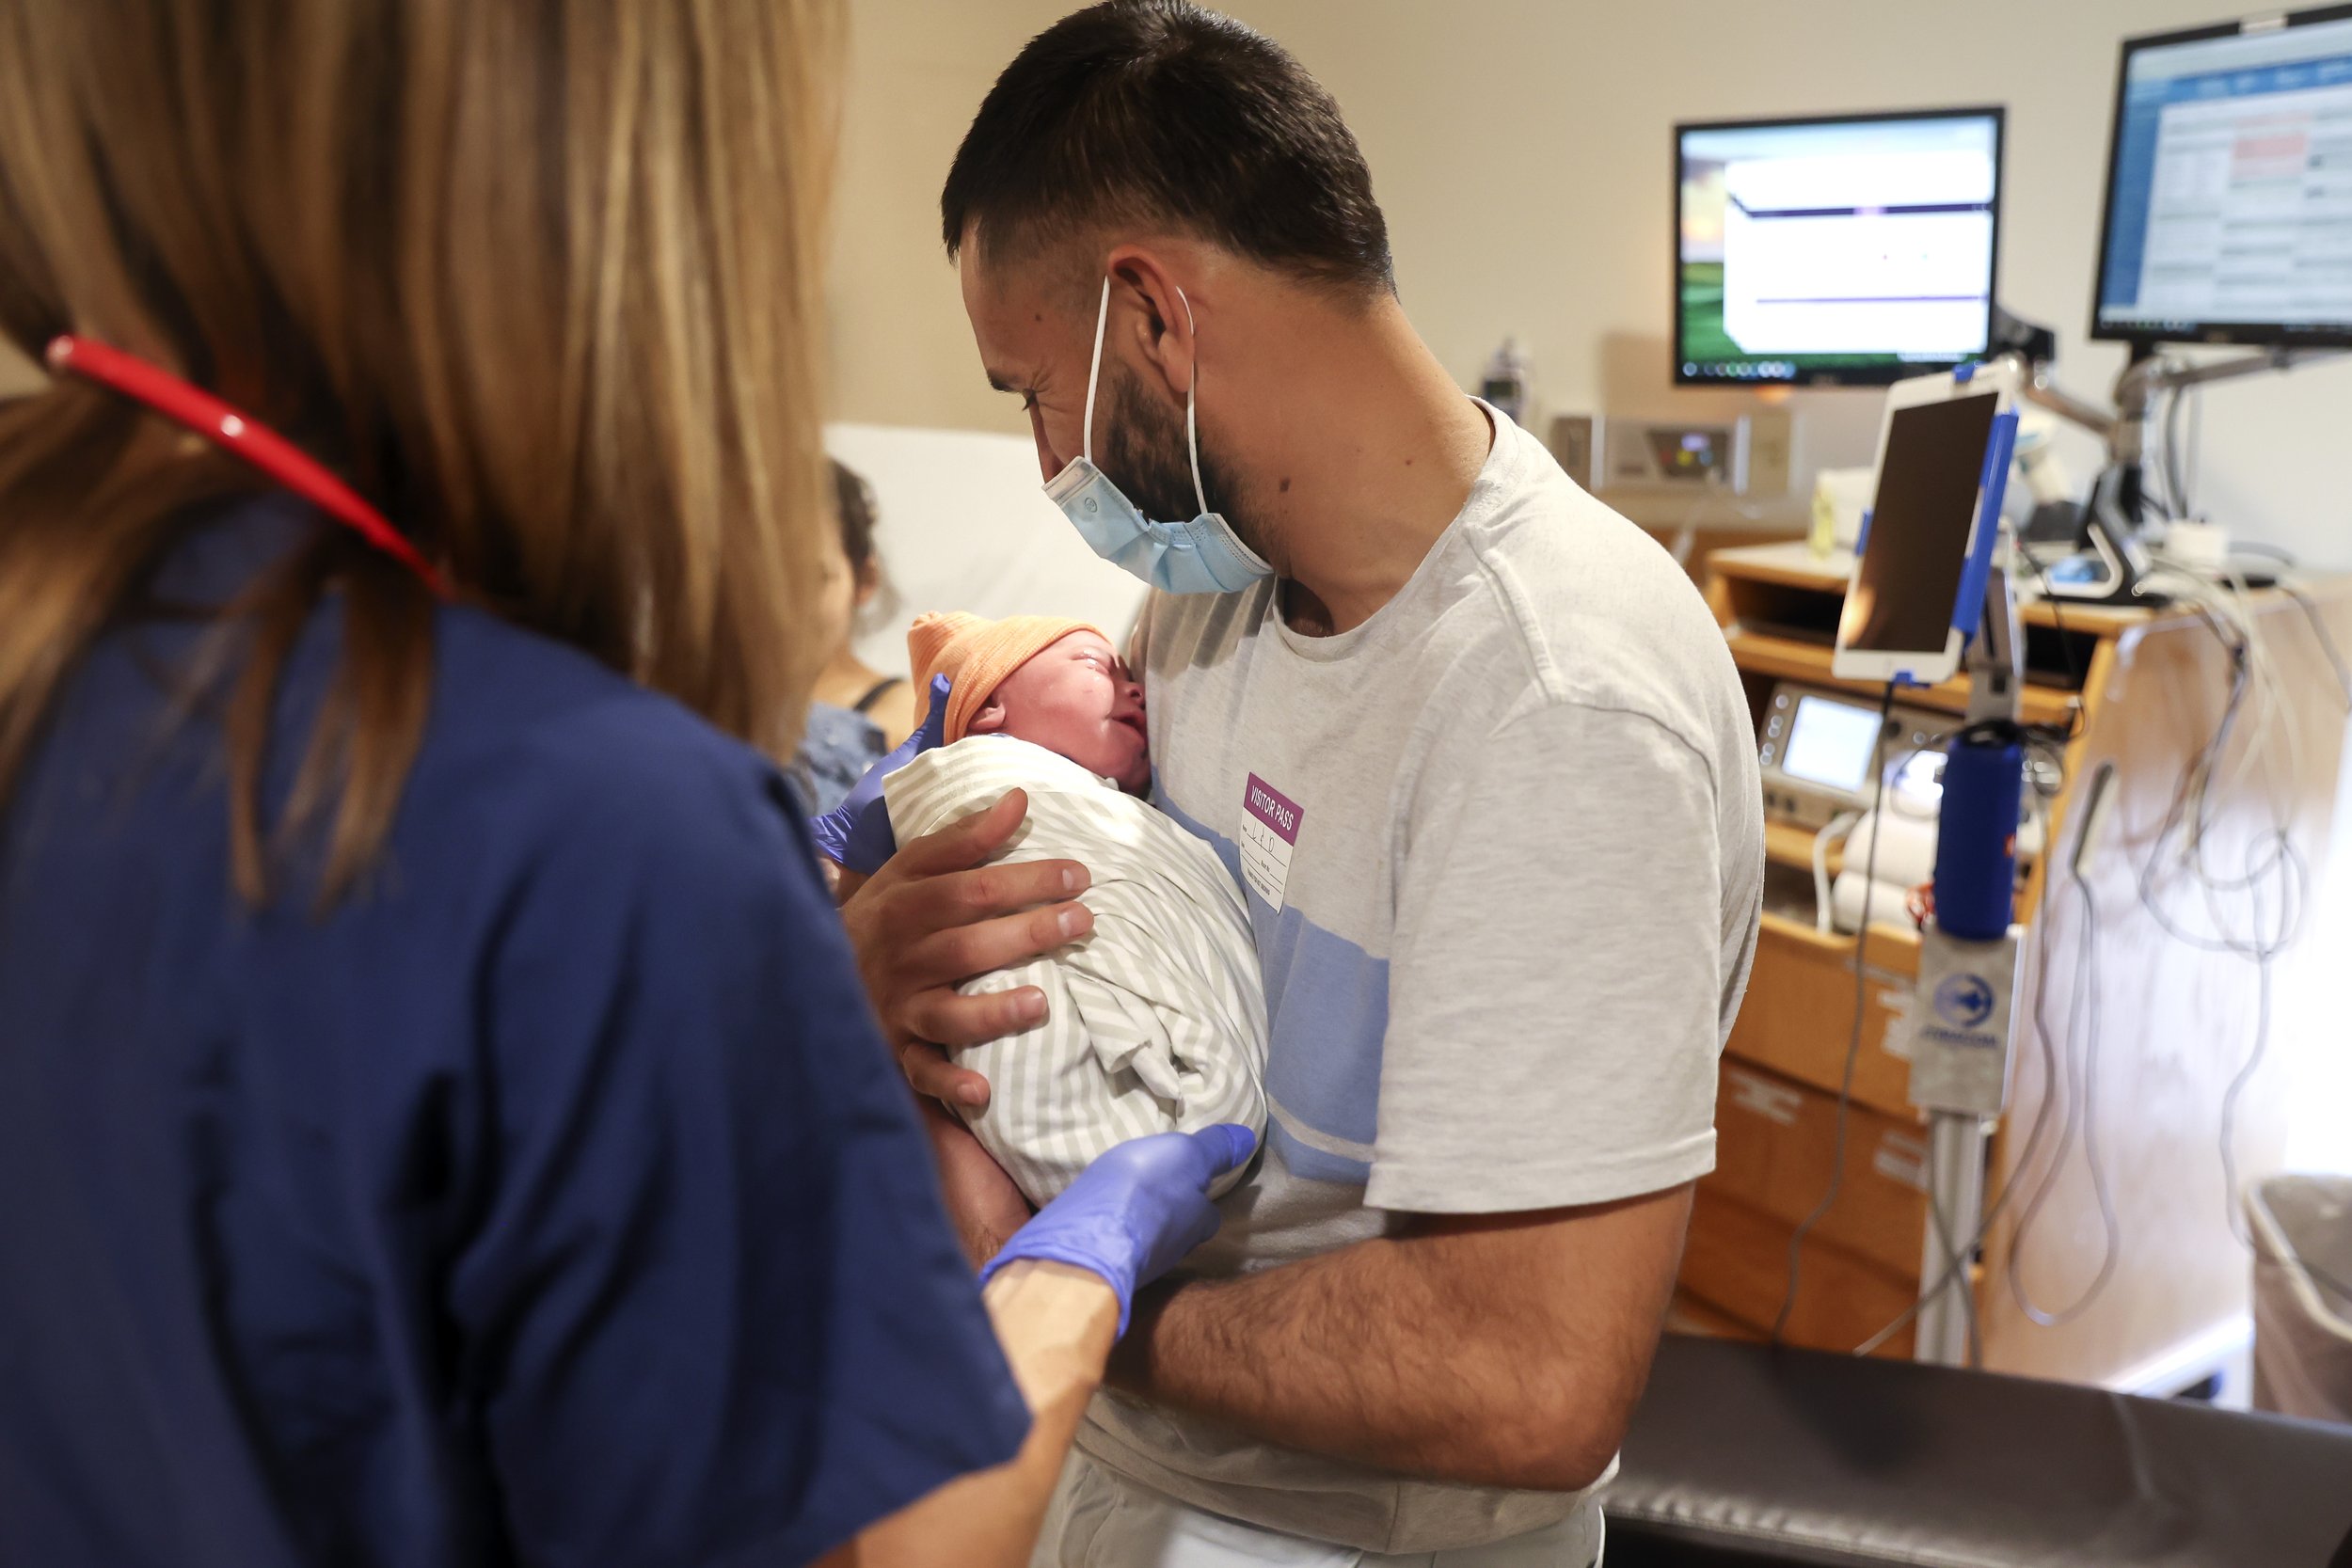  Najibullah Mohammadi holds his newborn son, Yusuf Mohammadi, for the first time at Mercy San Juan Hospital on Thursday, May 12, 2022.After spending over an hour at the Sutter Hospital, the Mohammadi family was informed that there were no female doct